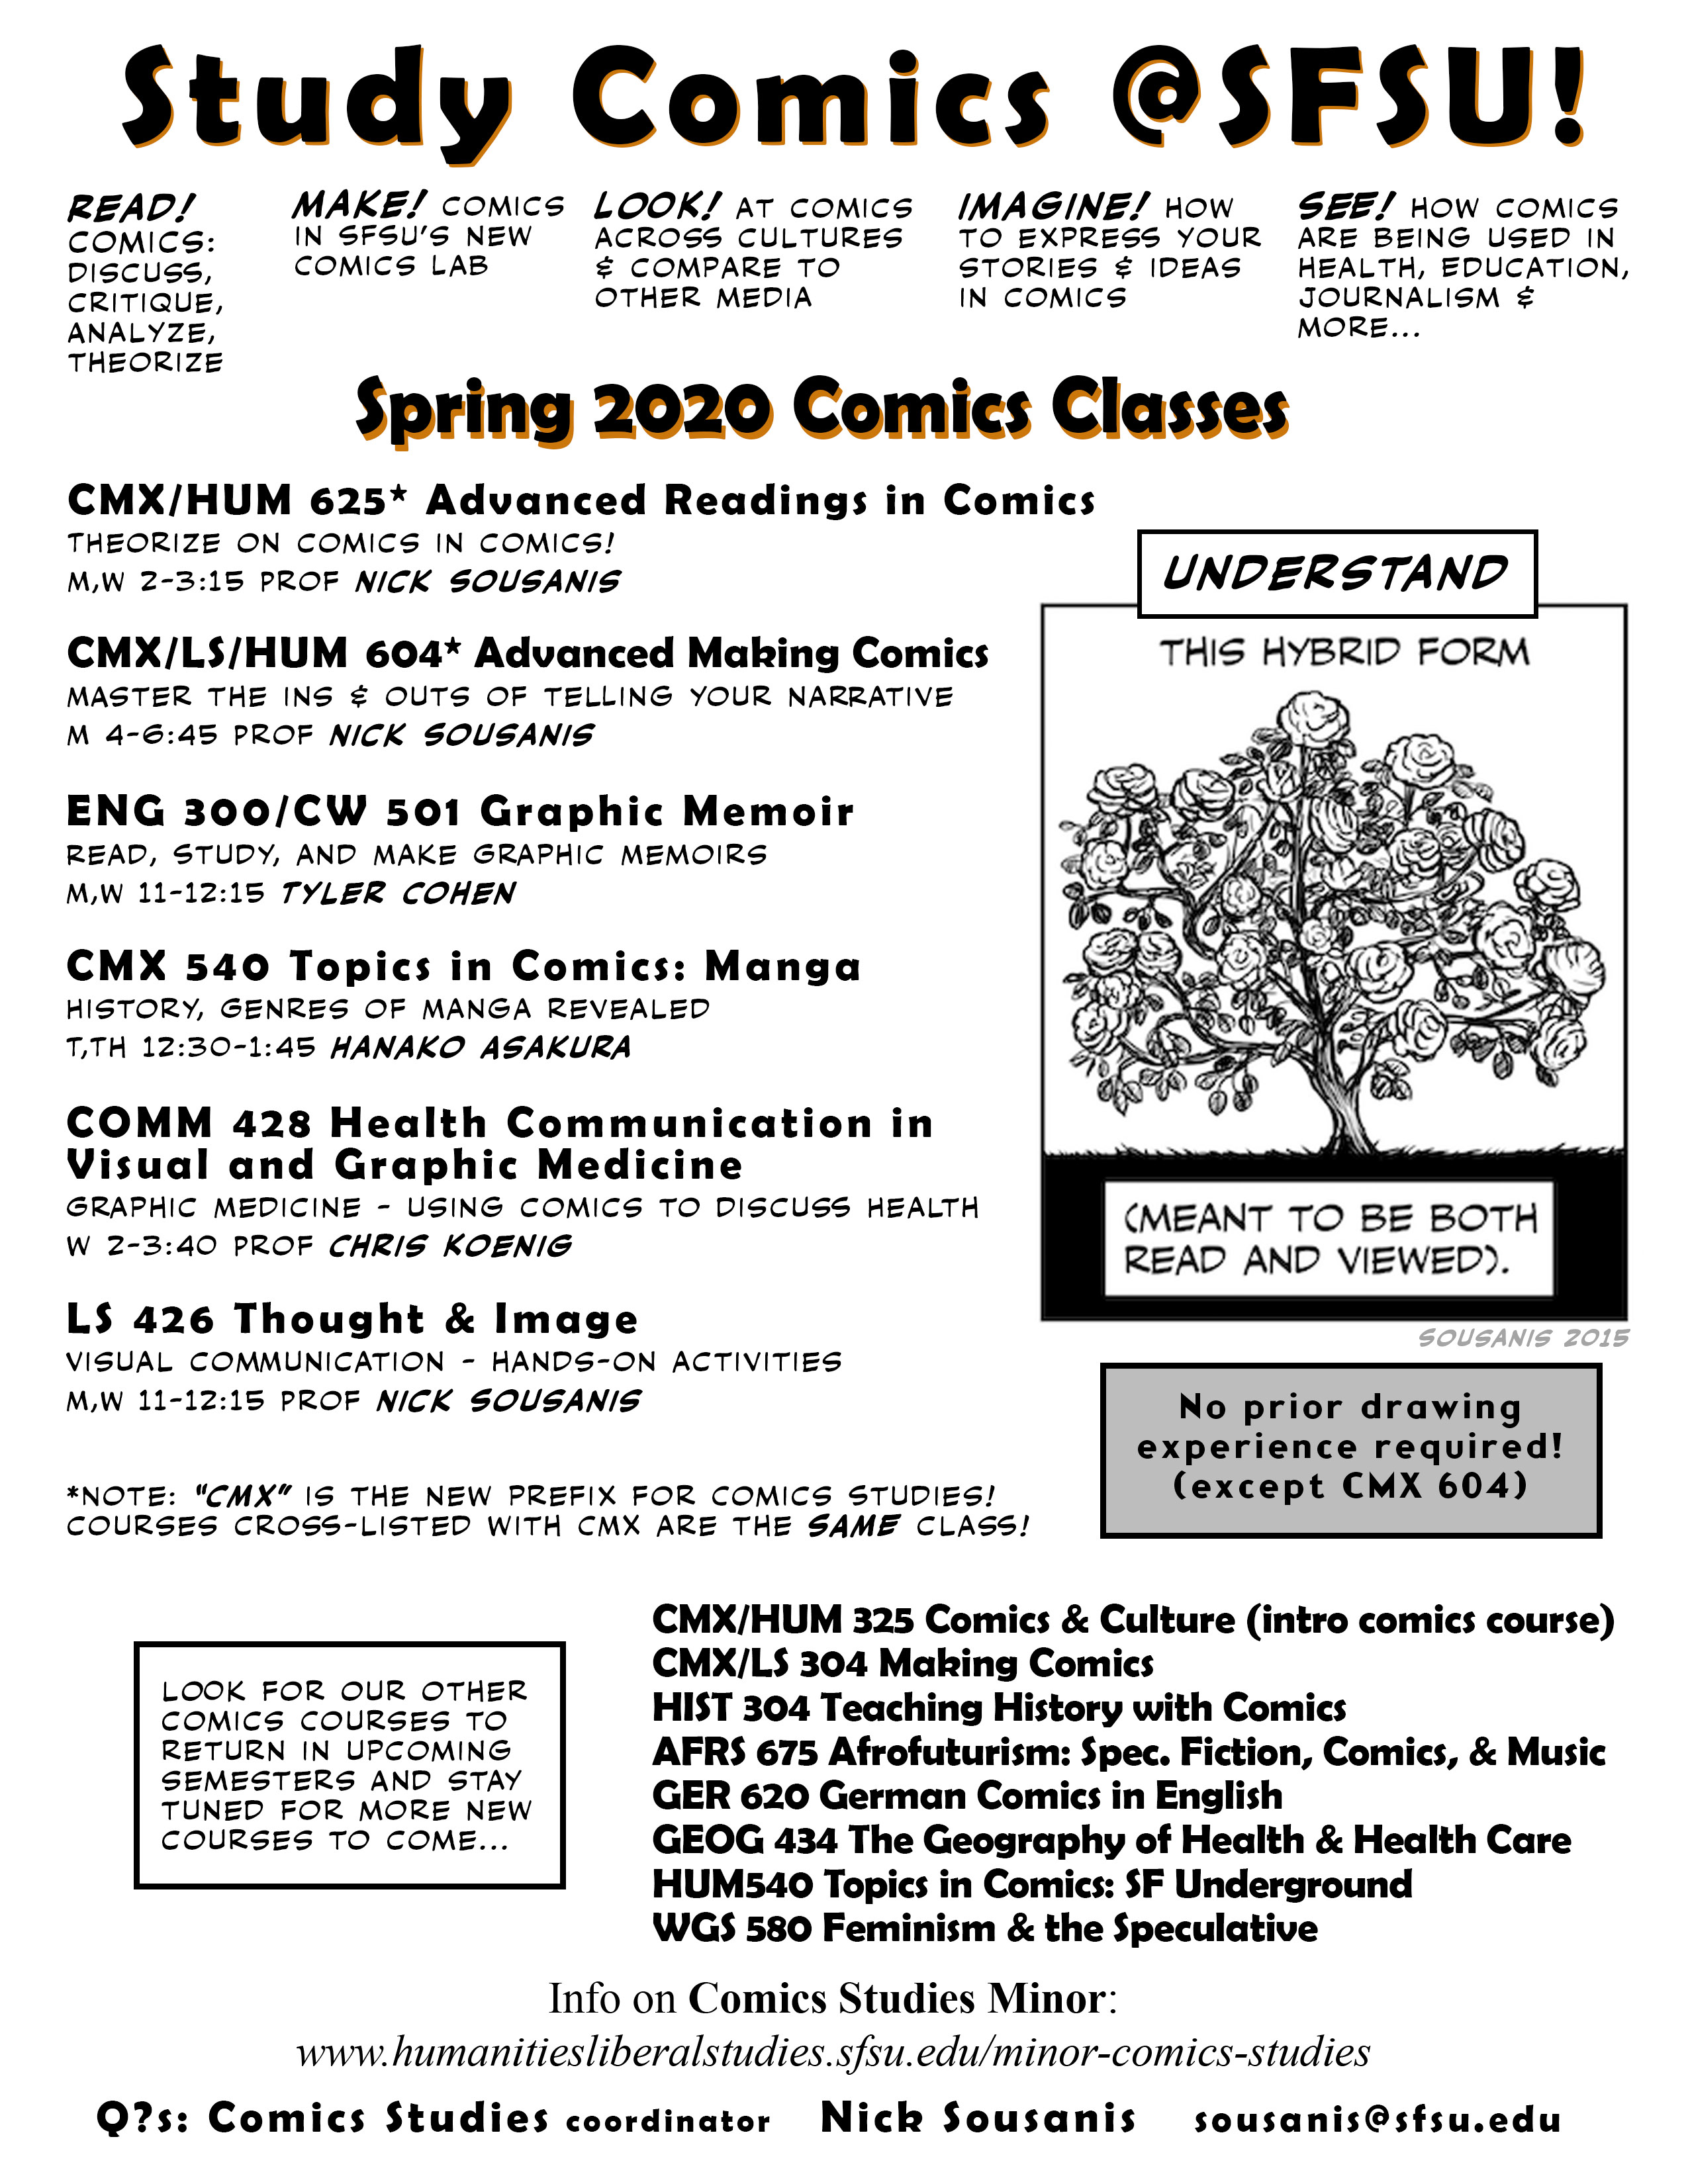 Spring 2020 Courses, illustrated in comic book style